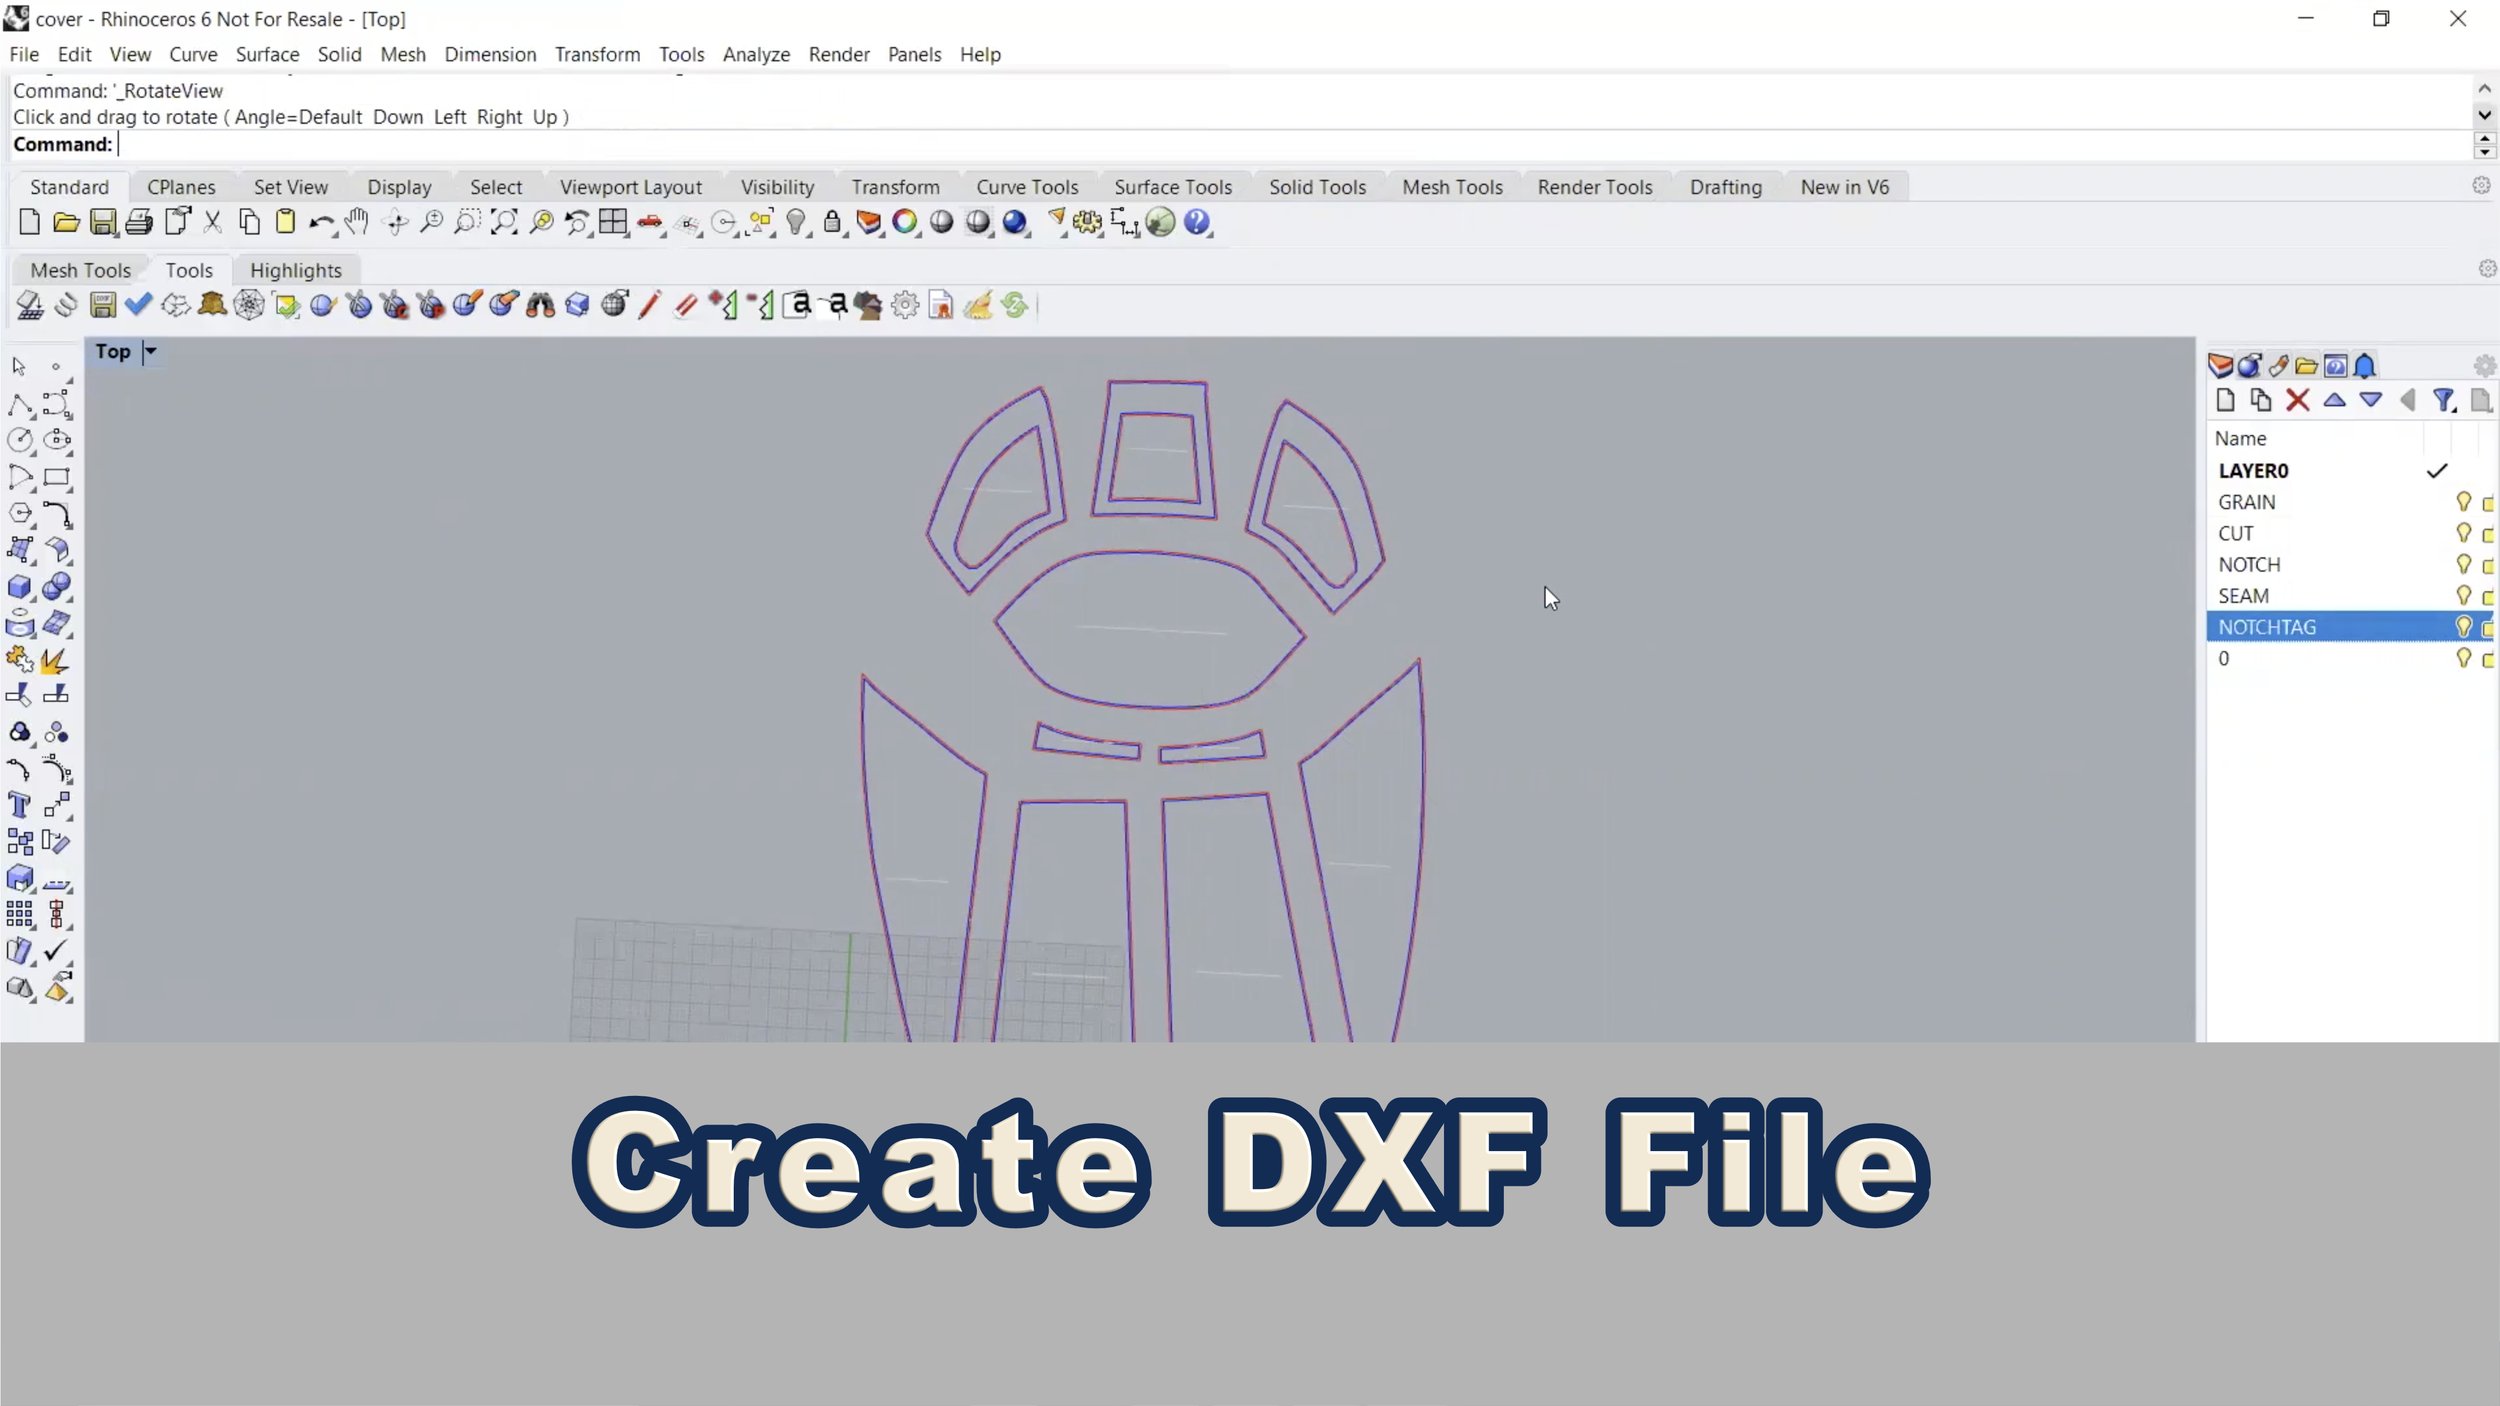 Create a DXF file in ExactFlat 3D to 2D digital patterning software